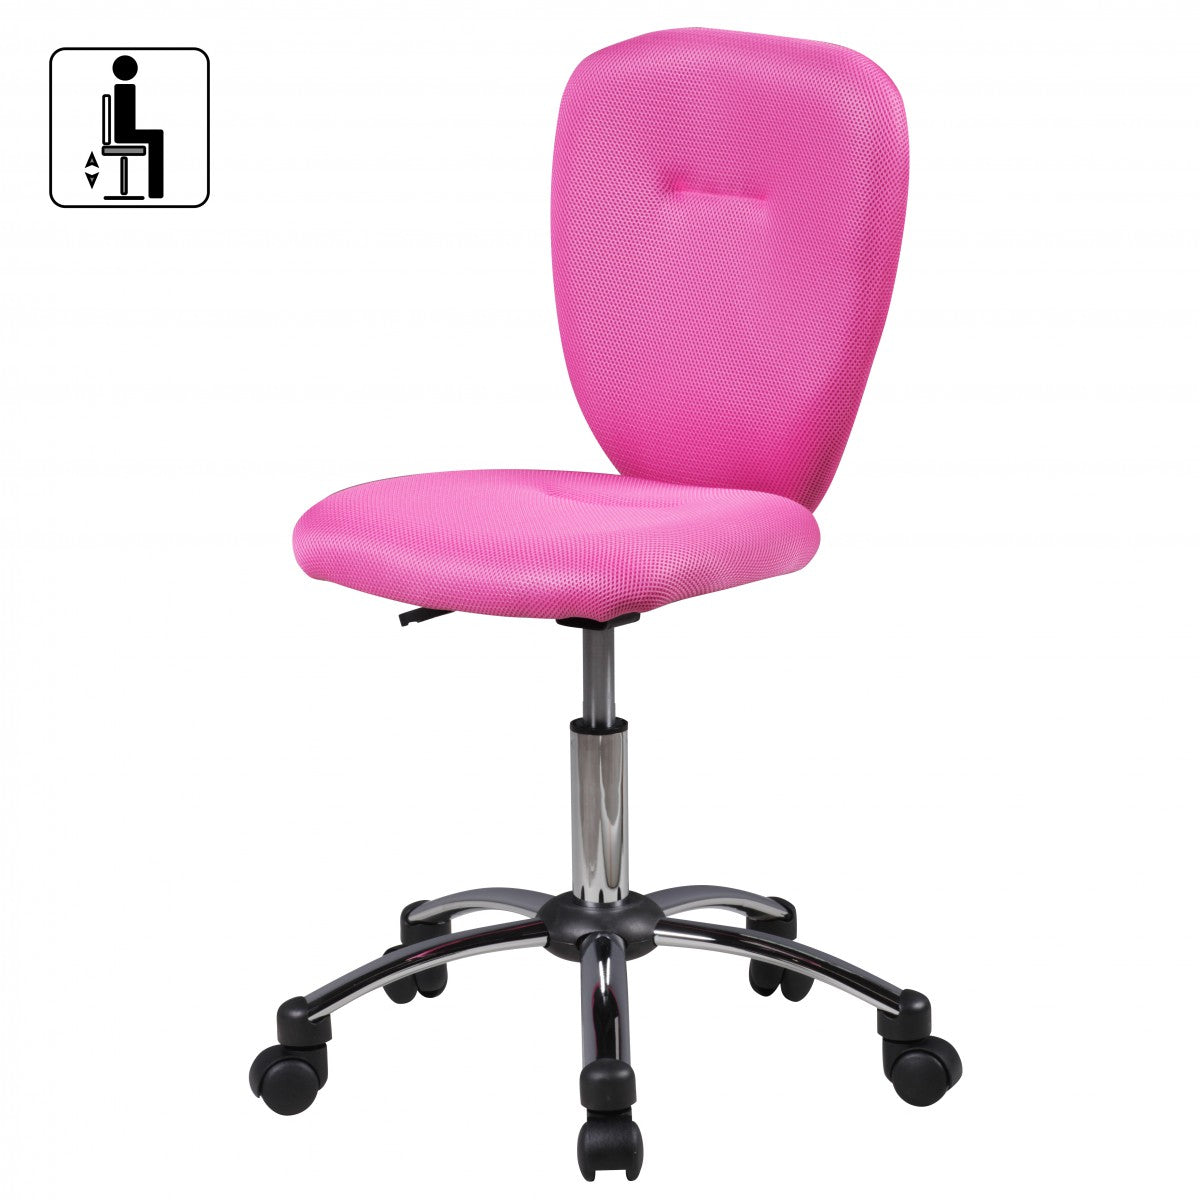 Nancy's Topeka Office Chair for Children - Swivel chair - Office chair - High chair - Adjustable - Black/Green/Blue/Pink